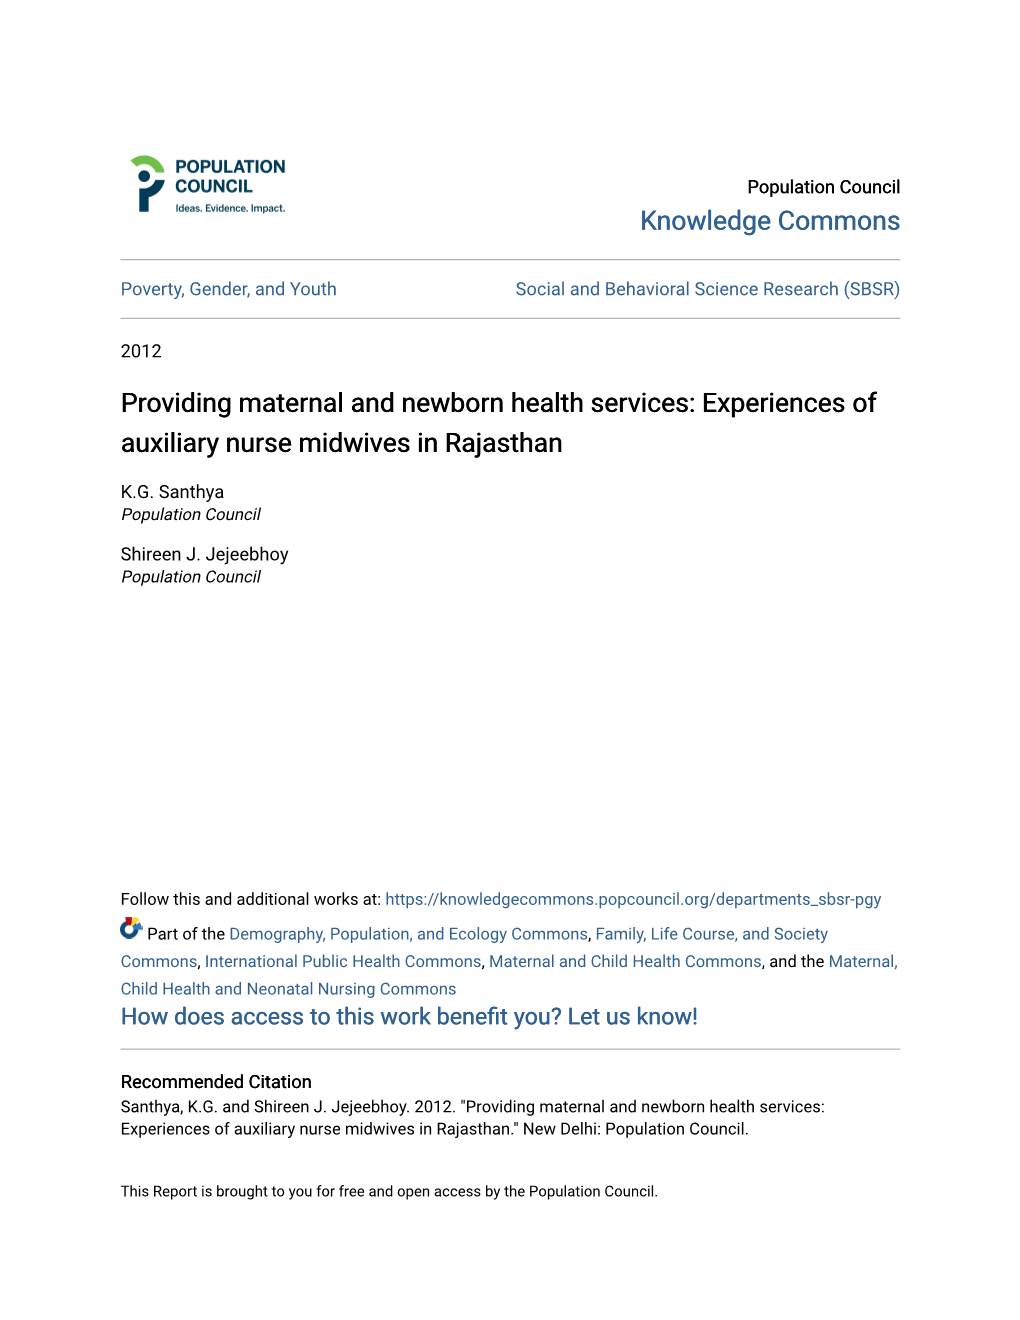 Providing Maternal and Newborn Health Services: Experiences of Auxiliary Nurse Midwives in Rajasthan